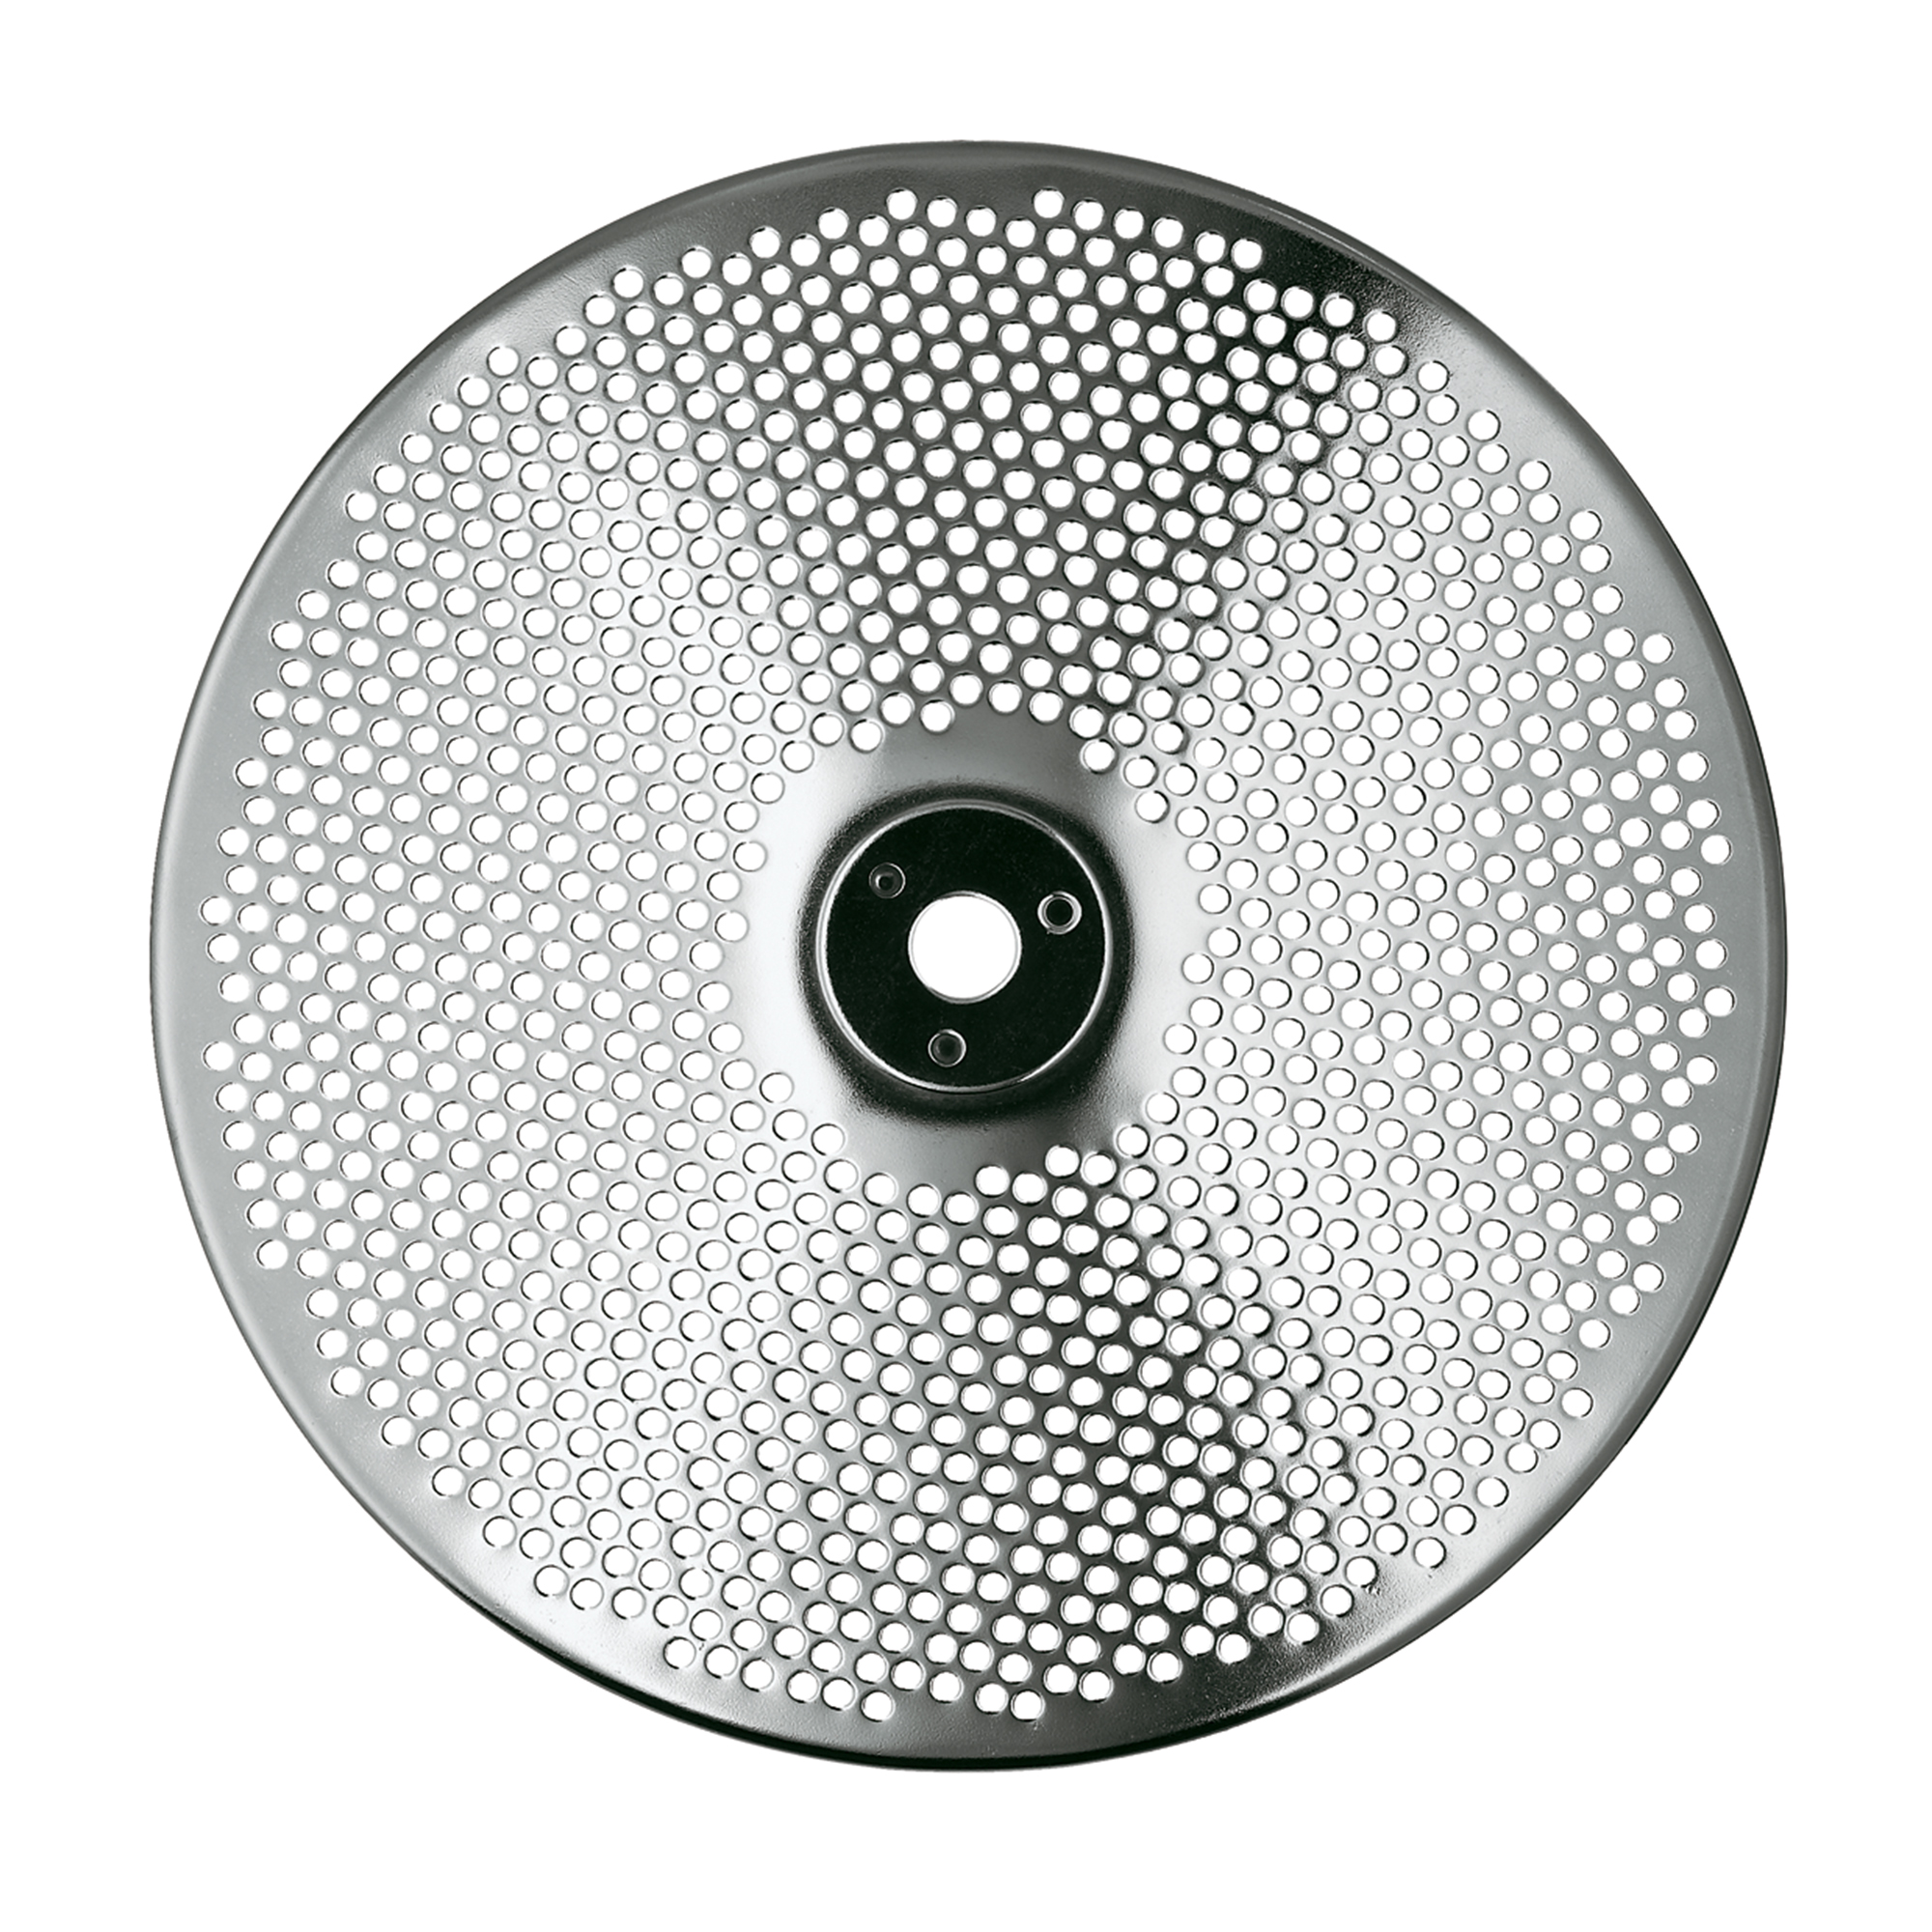 Sieve Disc 2 mm/0.08 in. (for Item no. 16251 & 16252)